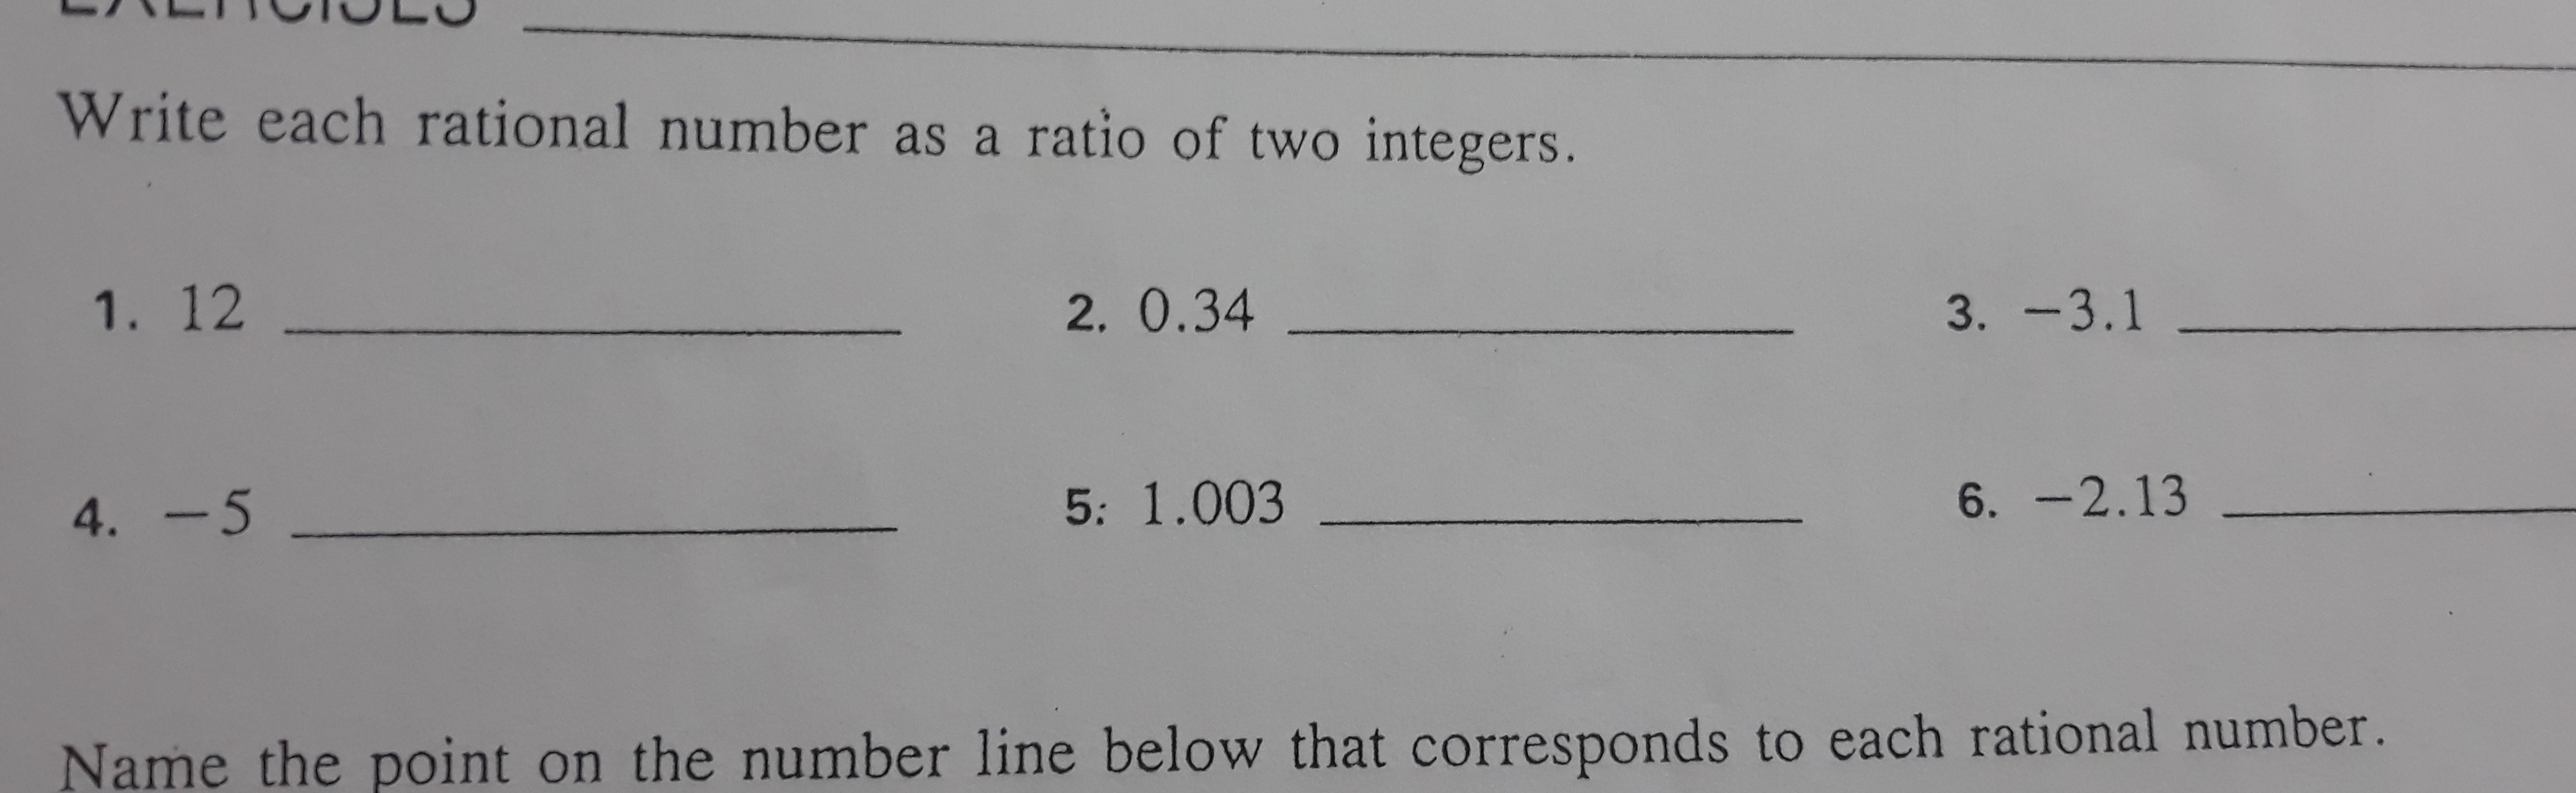 Write each rational number as a ratio of two integers.
1. 12
2. 0.34
3. -3.1
5: 1.003
6. -2.13
4. -5
